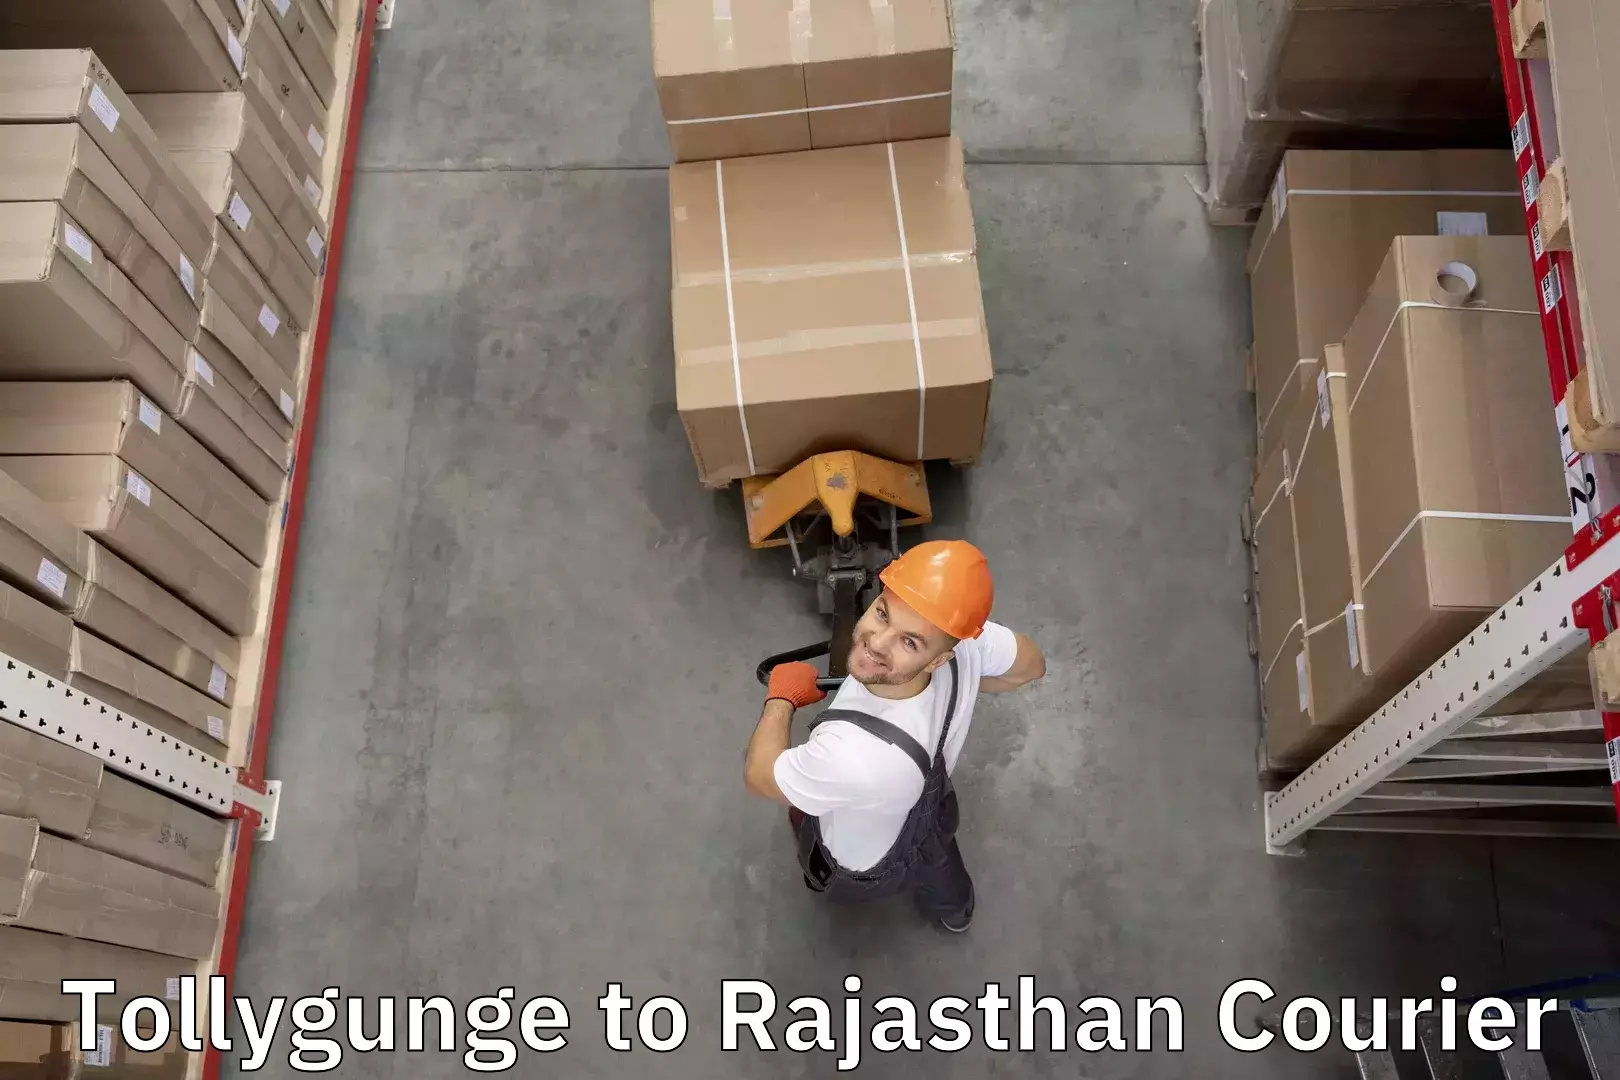 Luggage transport company Tollygunge to Ajeetgarh